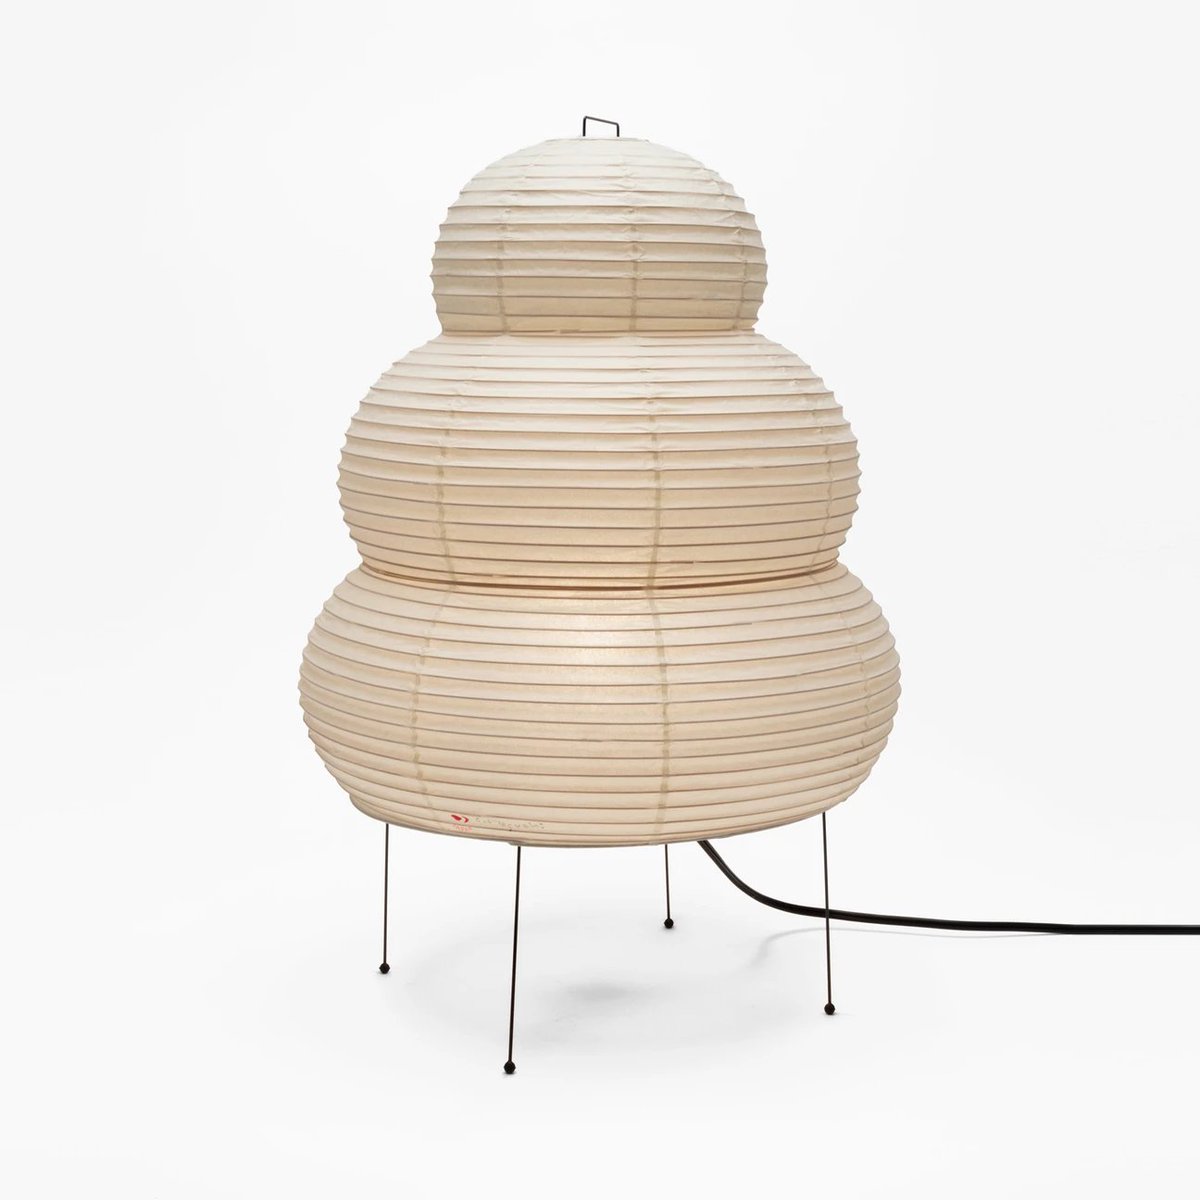 Don't know how many of you know the 20th-century Japanese-American designer Isamu Noguchi, but among many other wonderful accomplishments he made some amazing, functional light sculptures. Neat making-of video here:  https://shop.noguchi.org/collections/akari-light-sculptures